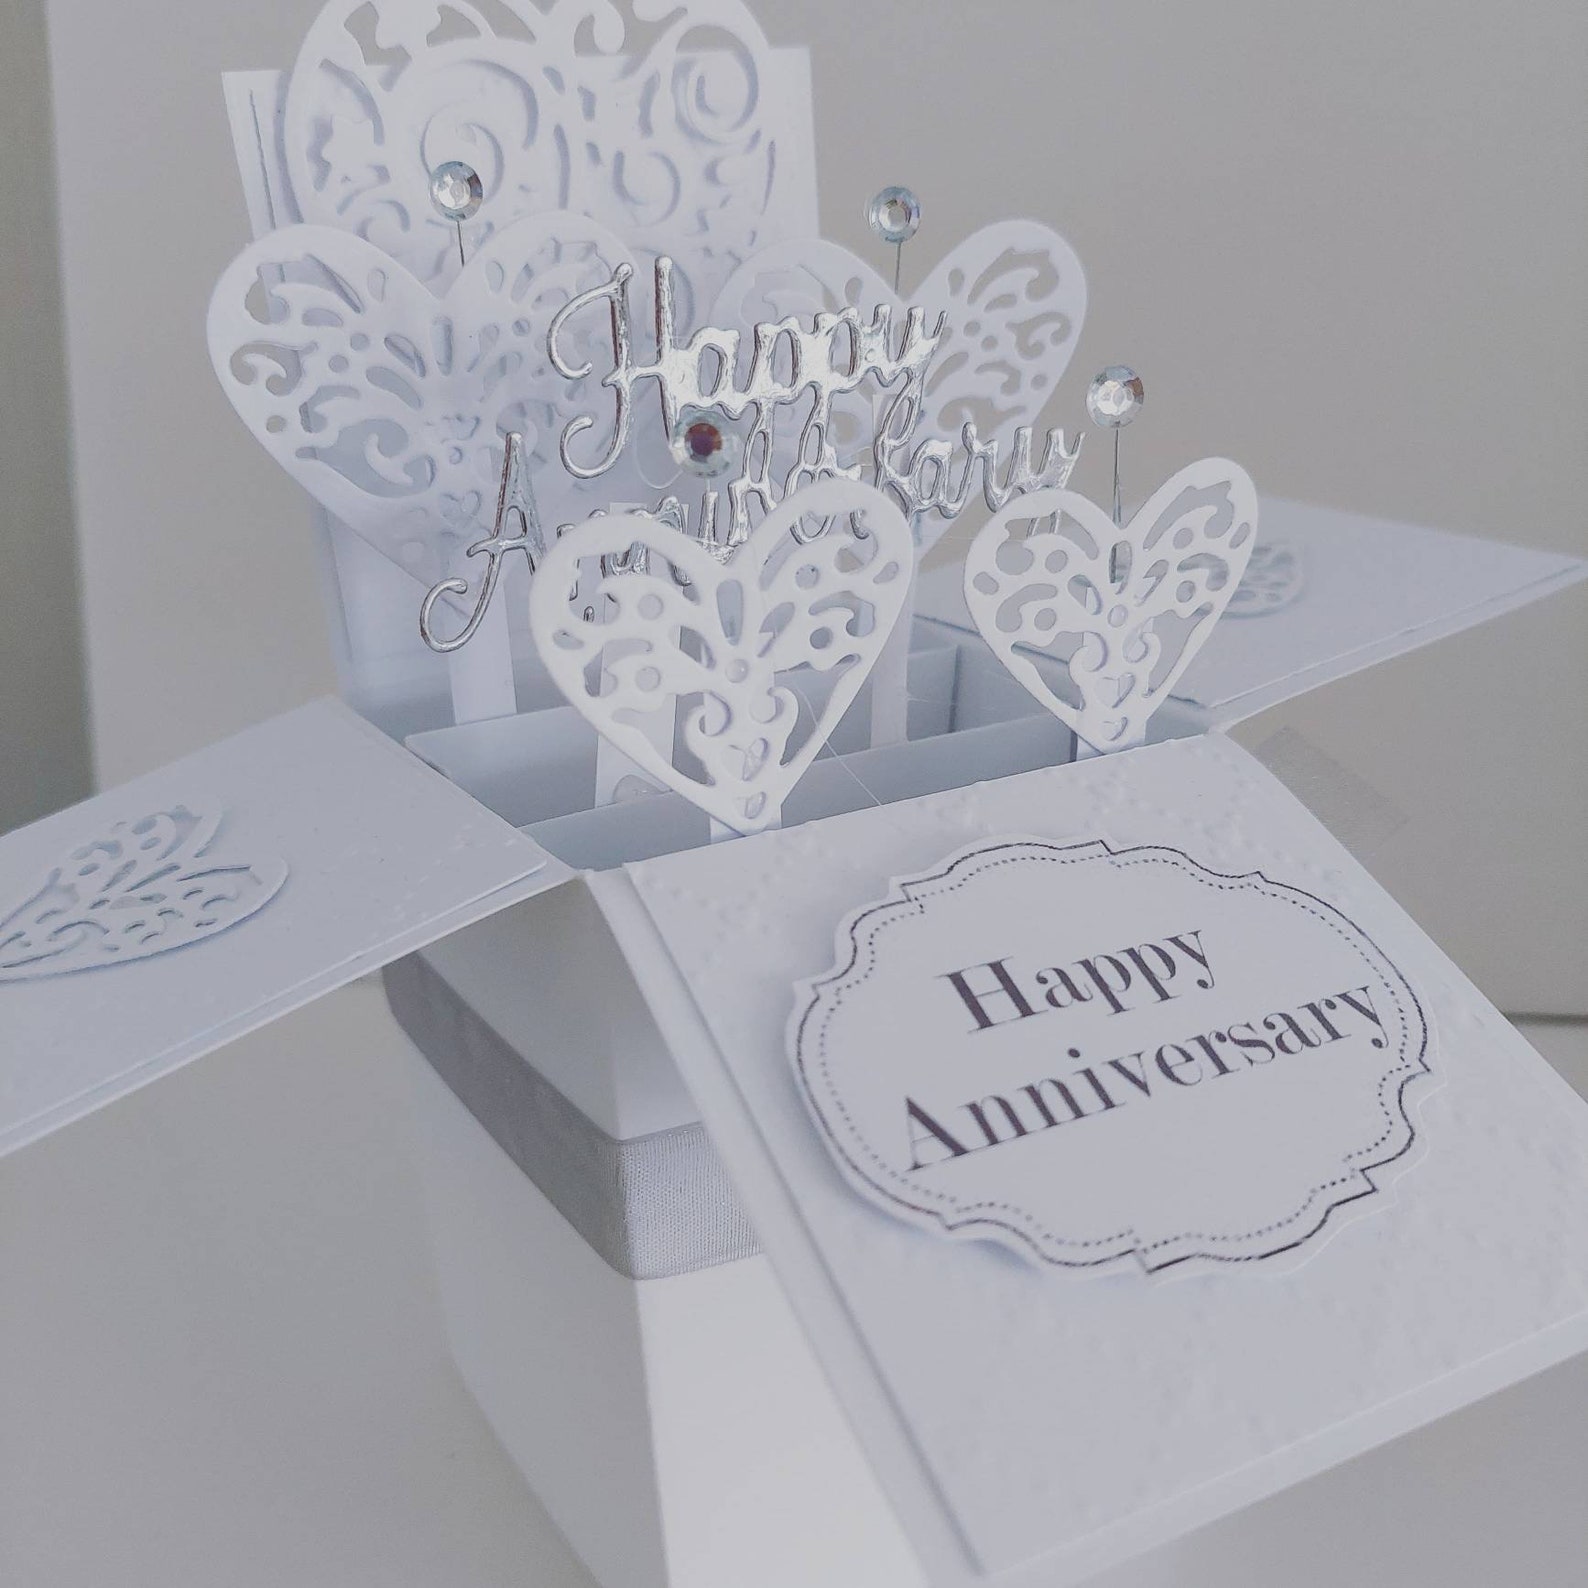 Happy Anniversary Names Can Be Added - Etsy UK